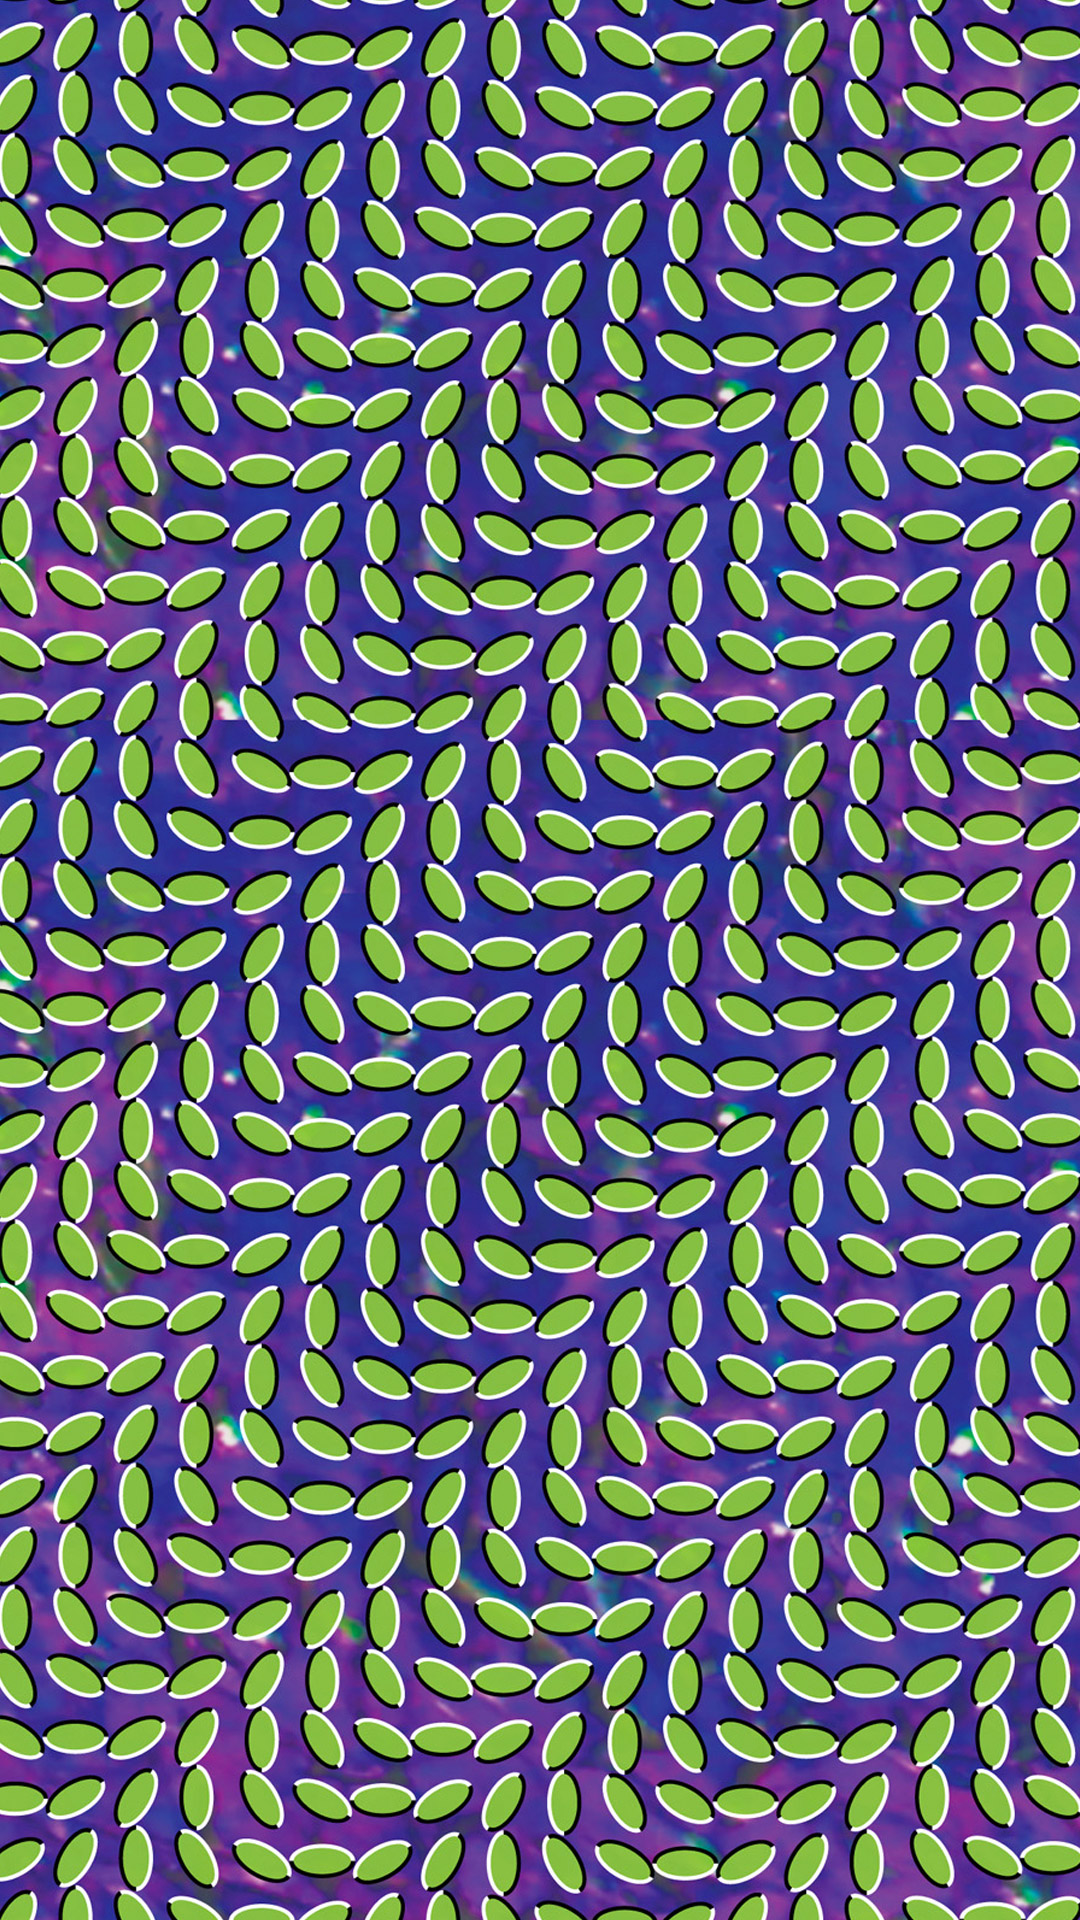 optical illusions that appear to move